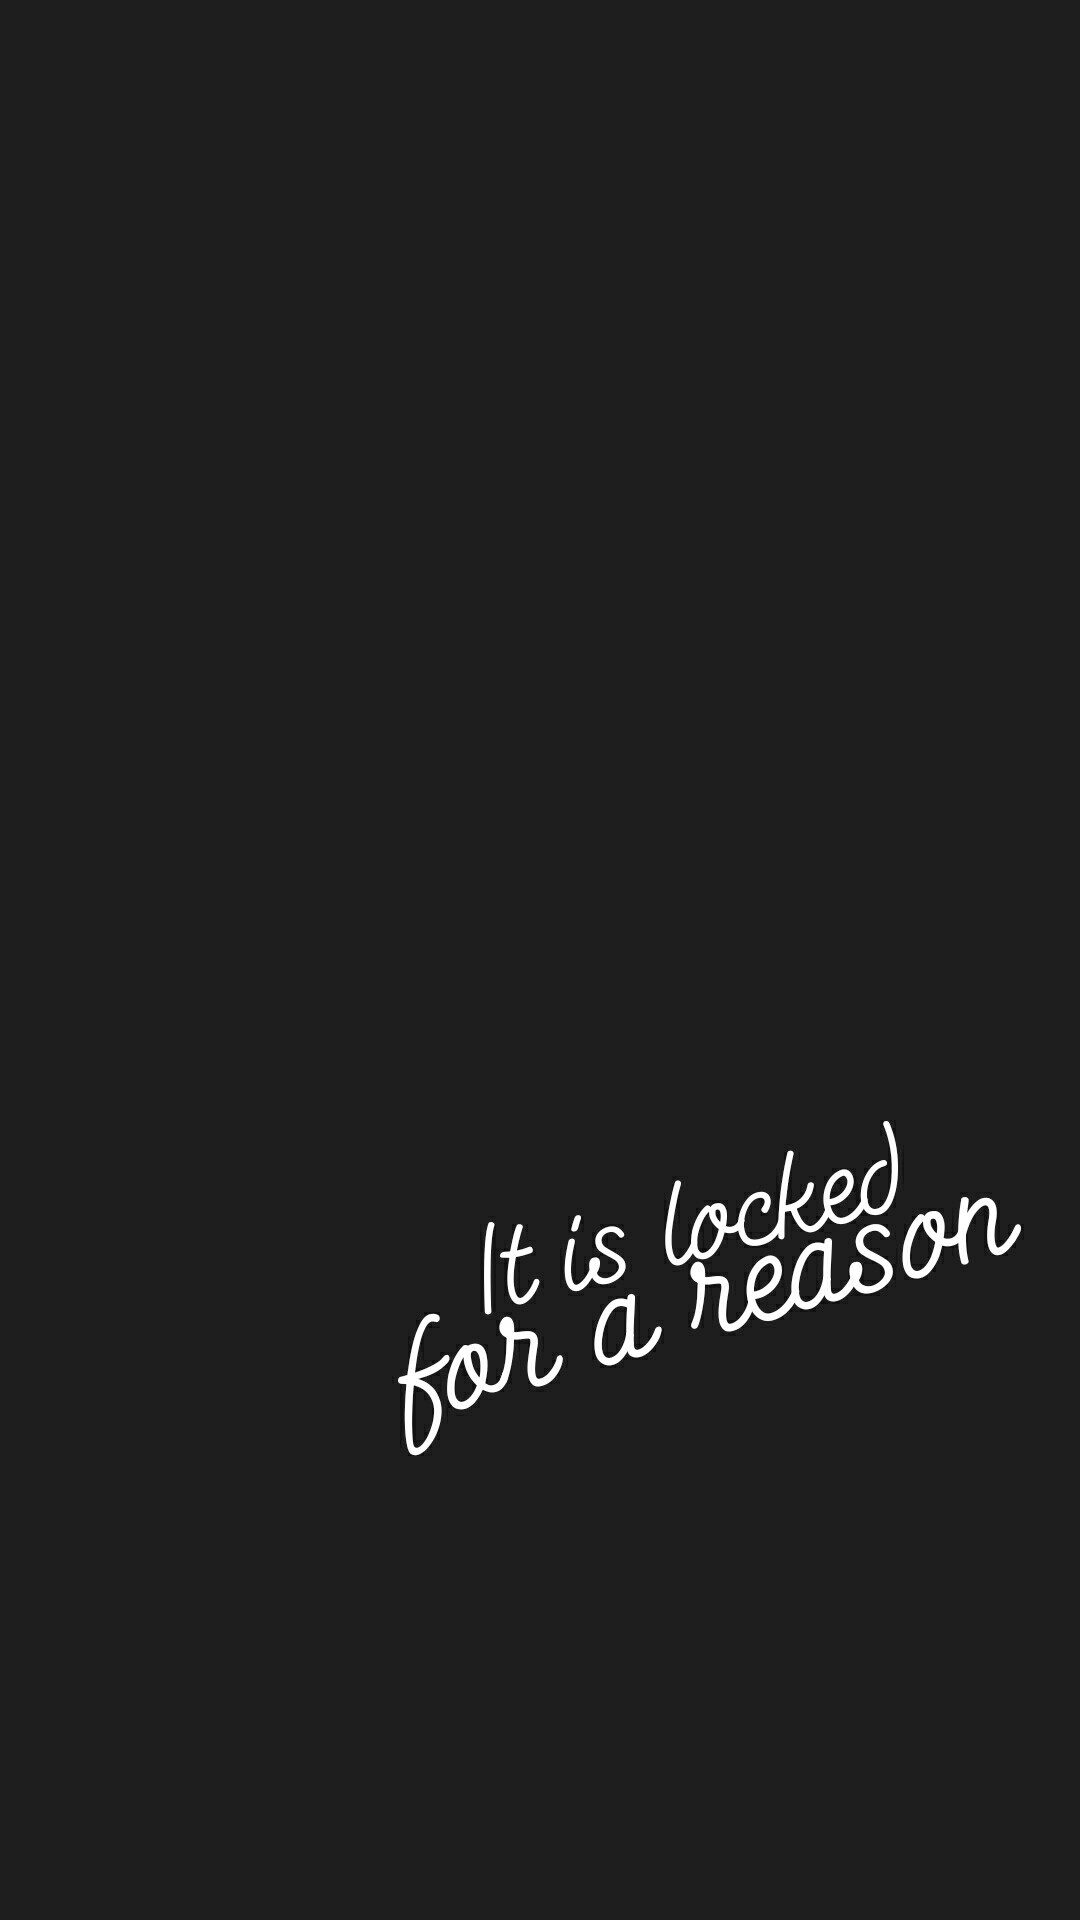 1080x1920 Locked for Reason - Tap to see more locked phone wallpapers! - @mobile9